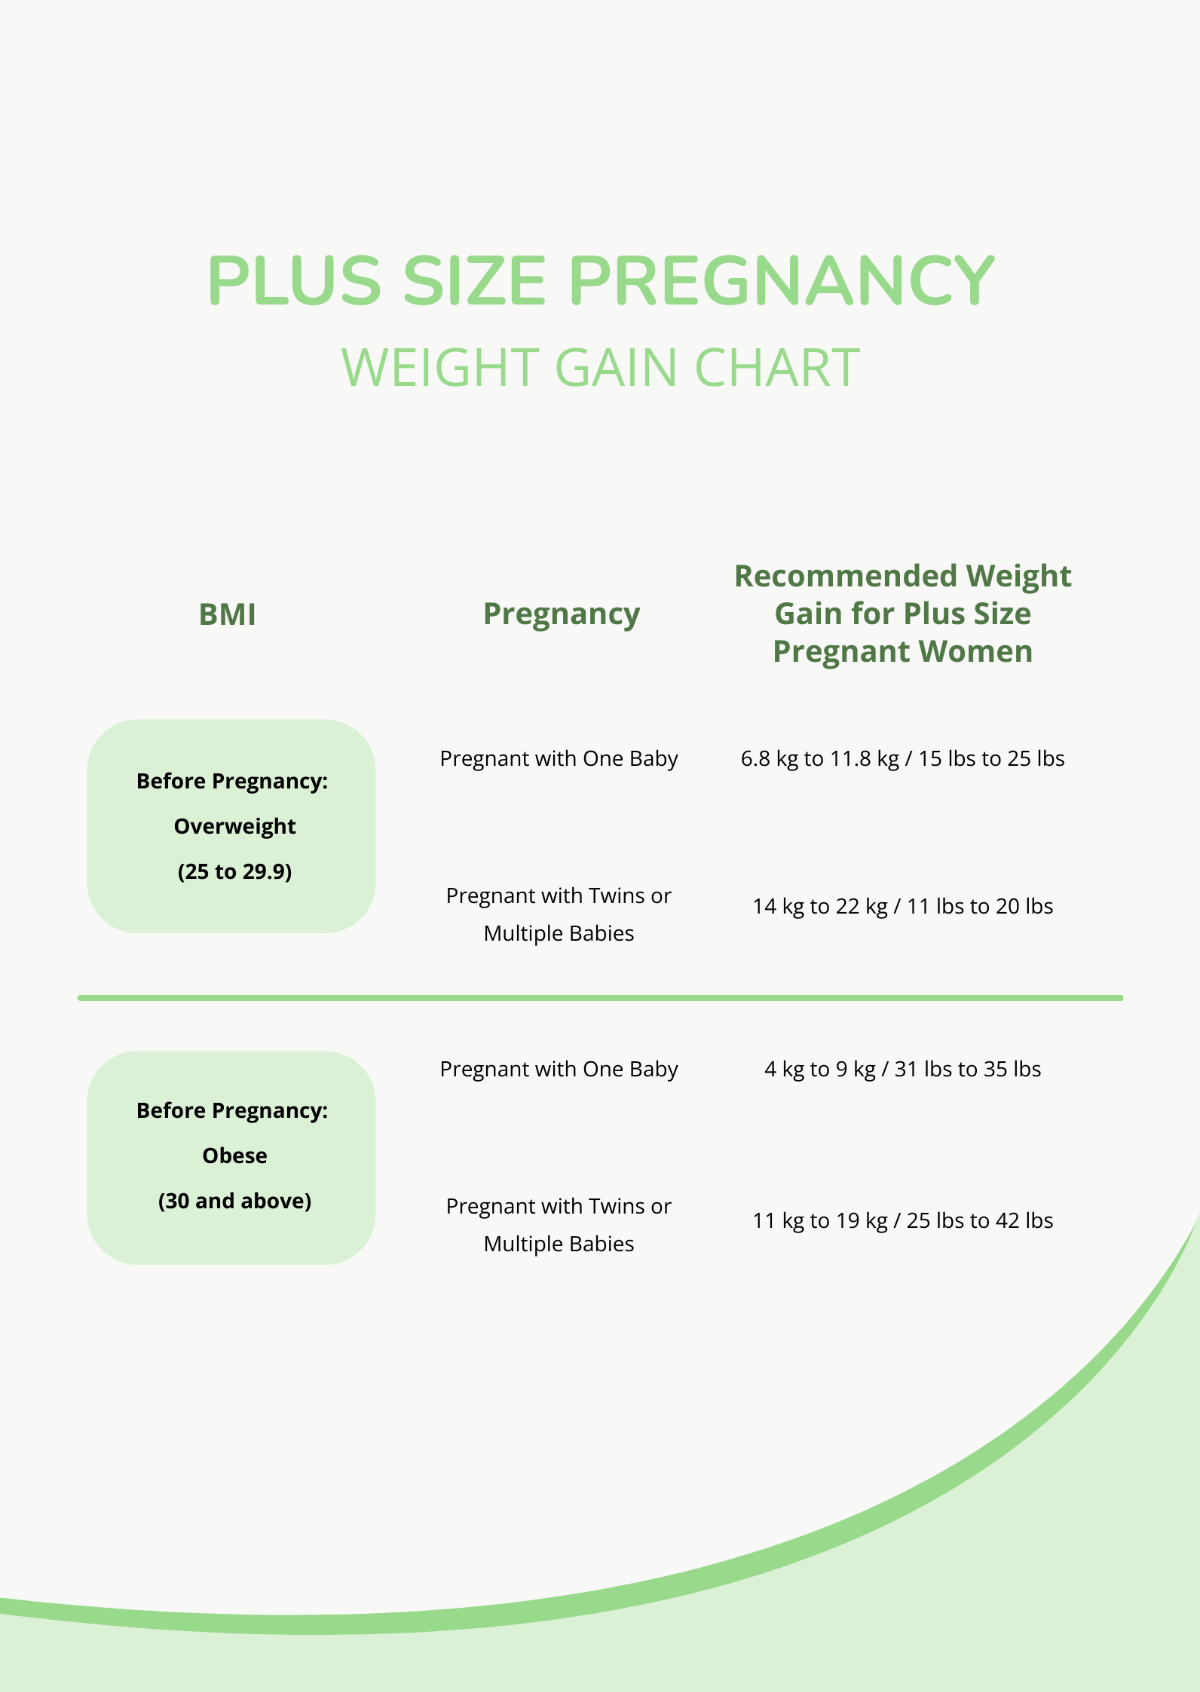 Plus Size Pregnancy Weight Gain Chart